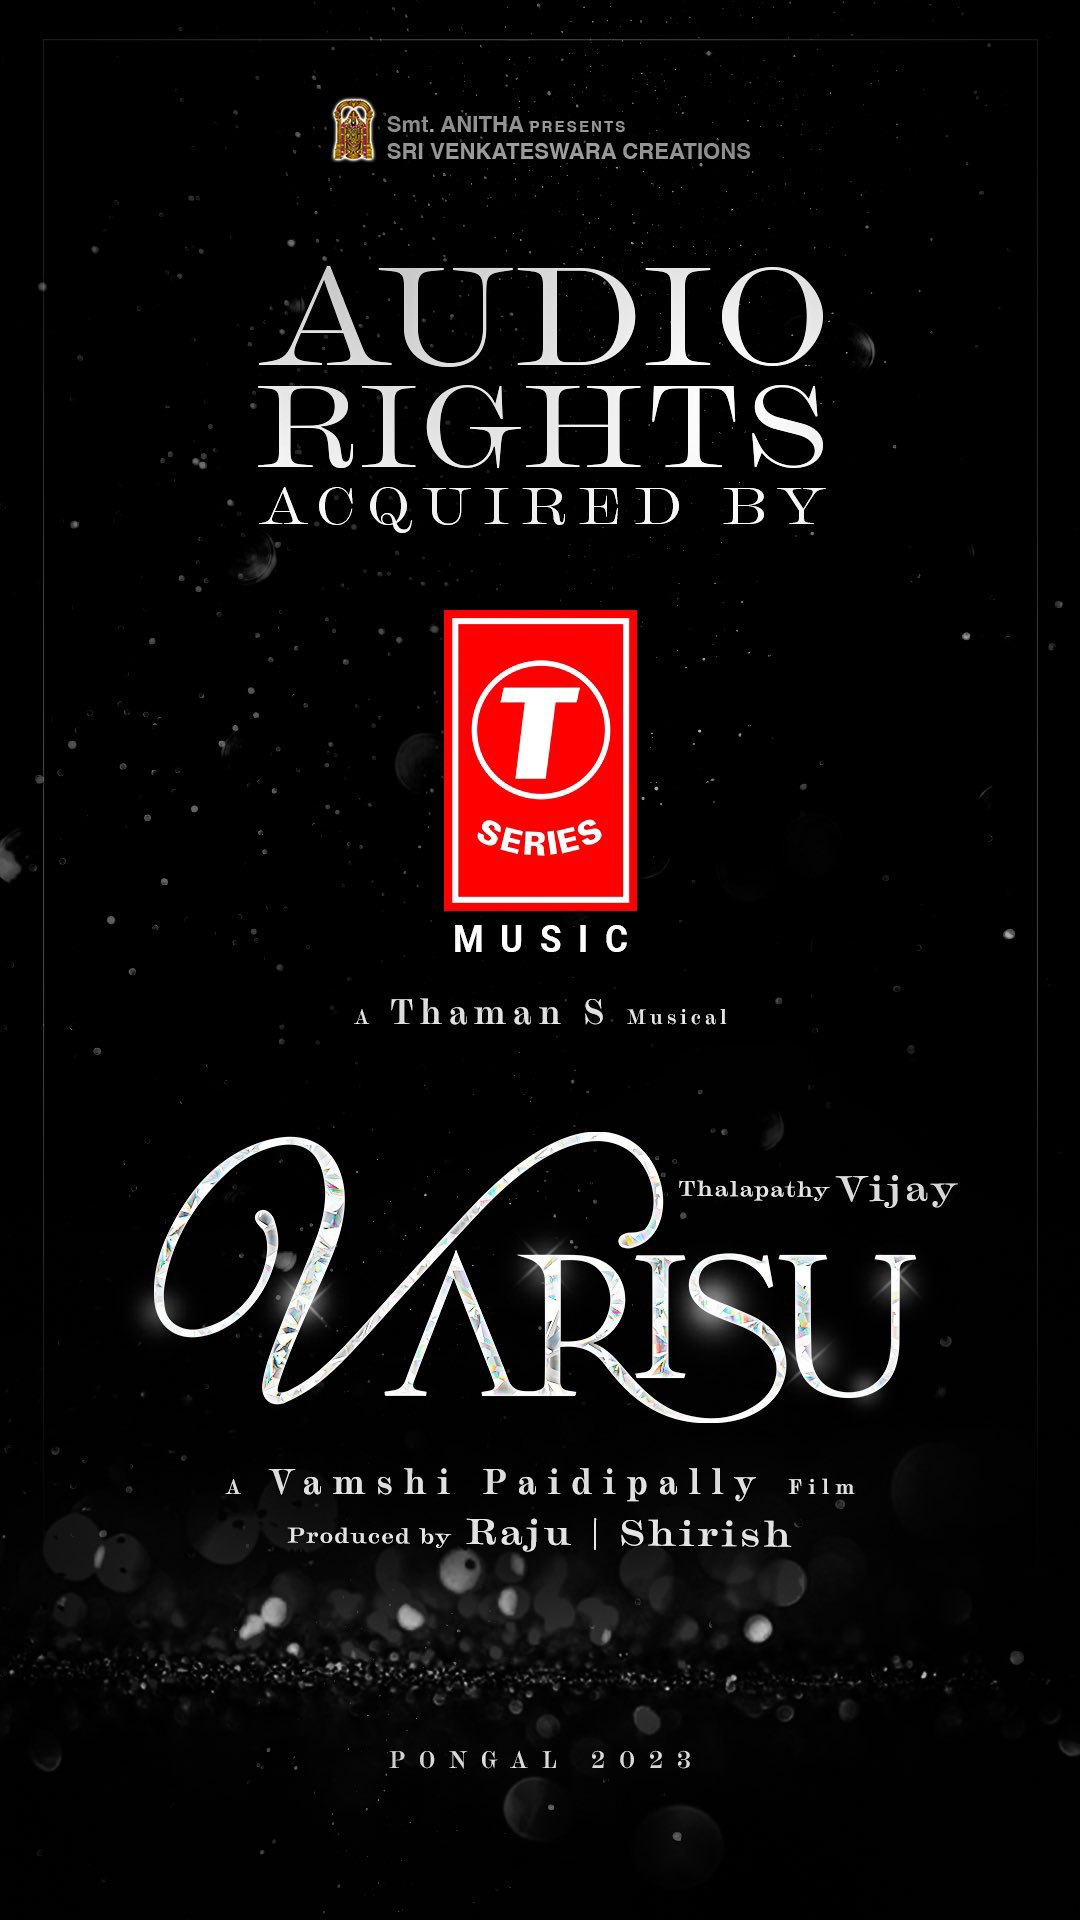 Varisu audio rights bagged by T-series.